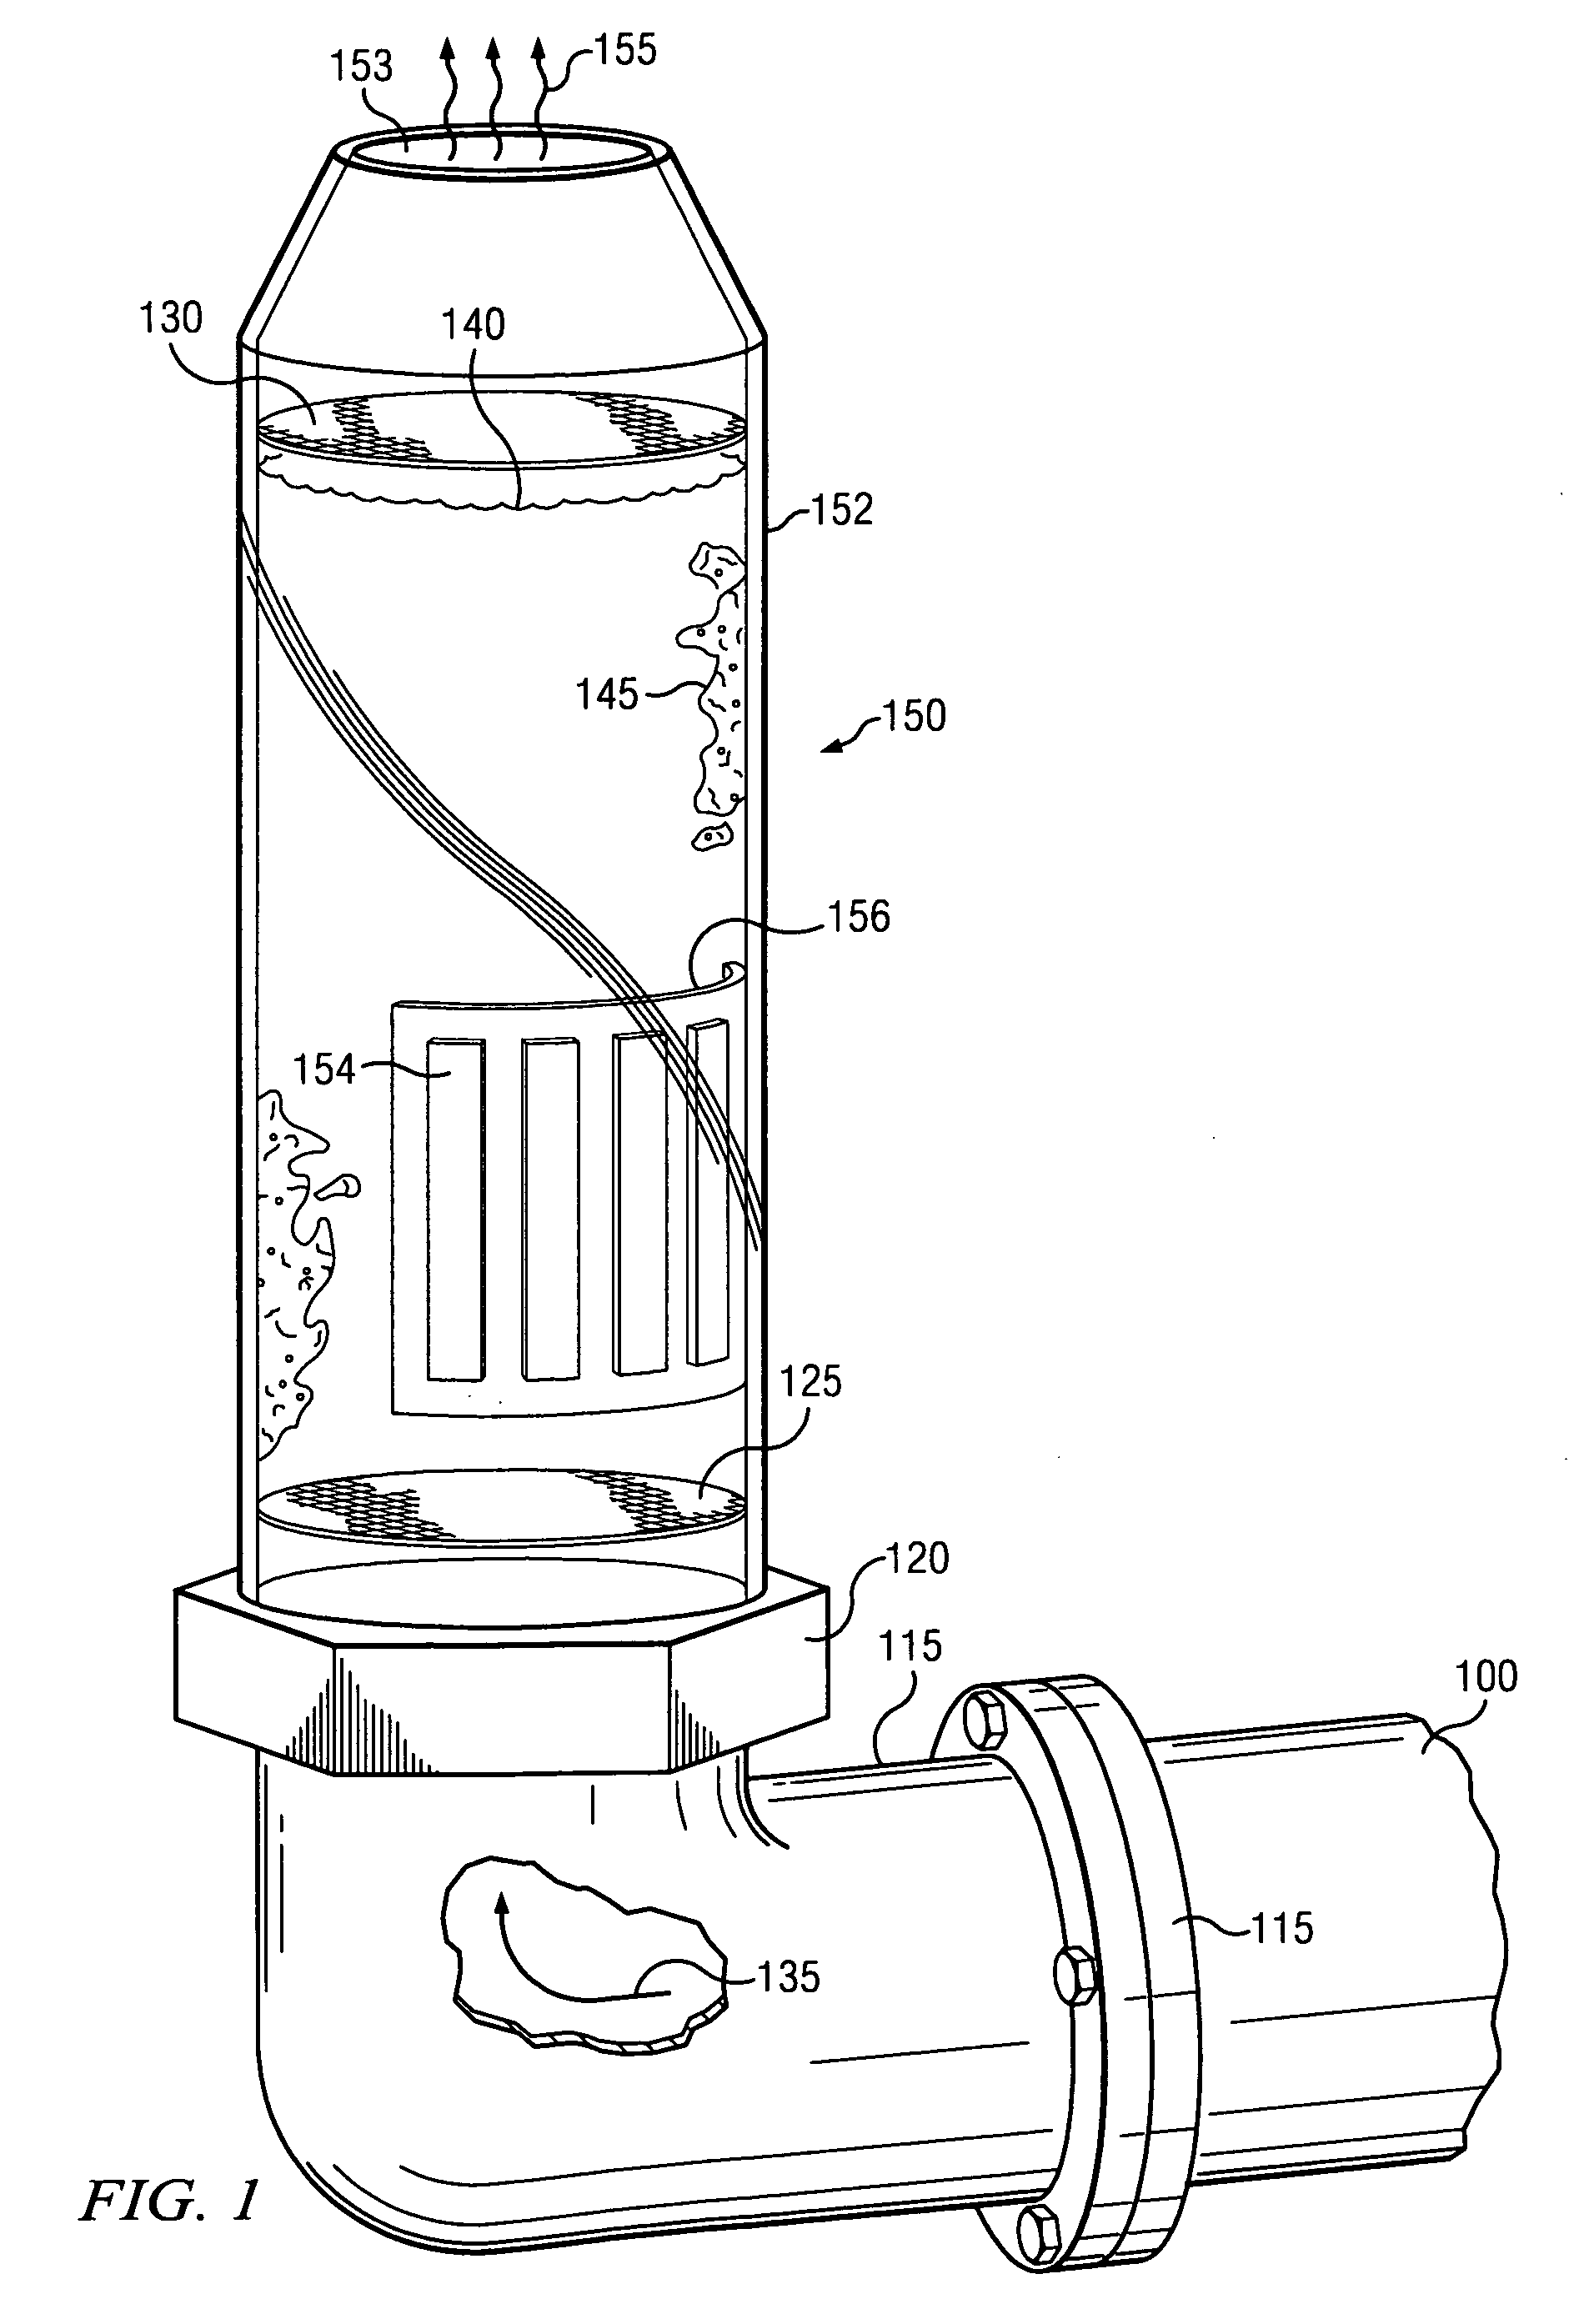 Bioactive carbon dioxide filter apparatus and method therefor